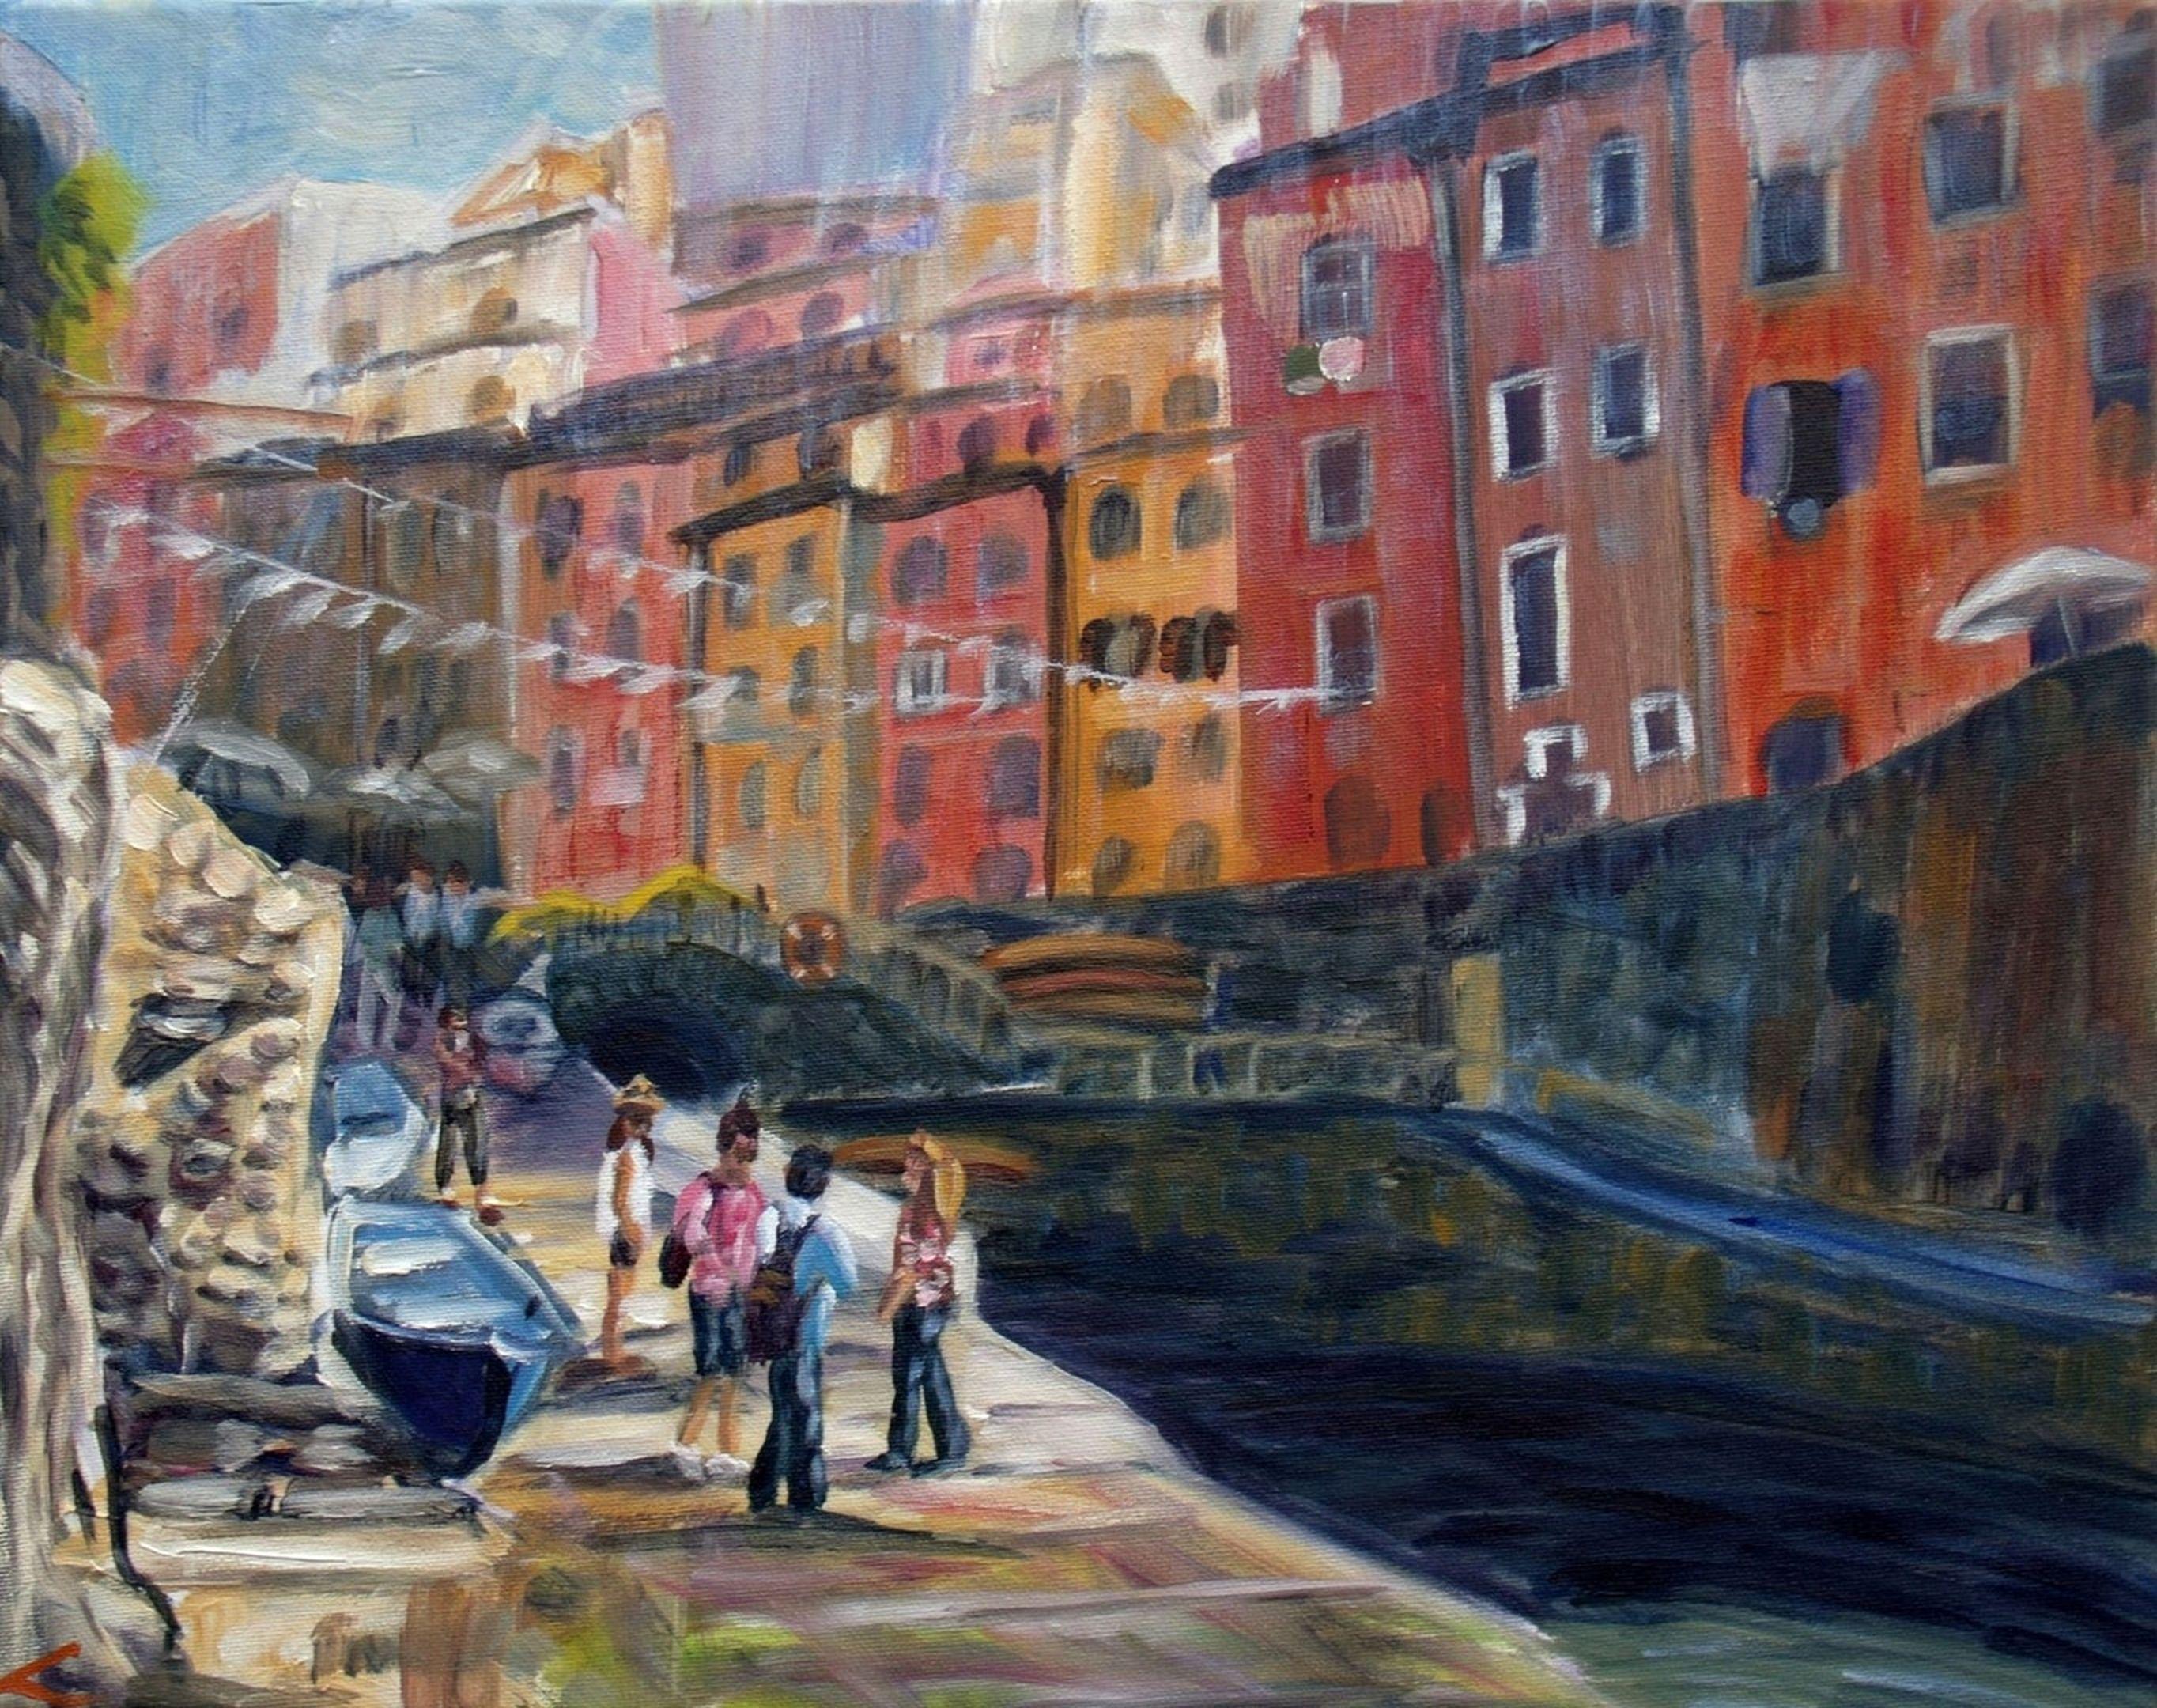 Cityscape with people, river, boats, painted by oil on canvas. :: Painting :: Impressionist :: This piece comes with an official certificate of authenticity signed by the artist :: Ready to Hang: Yes :: Signed: Yes :: Signature Location: on front ::